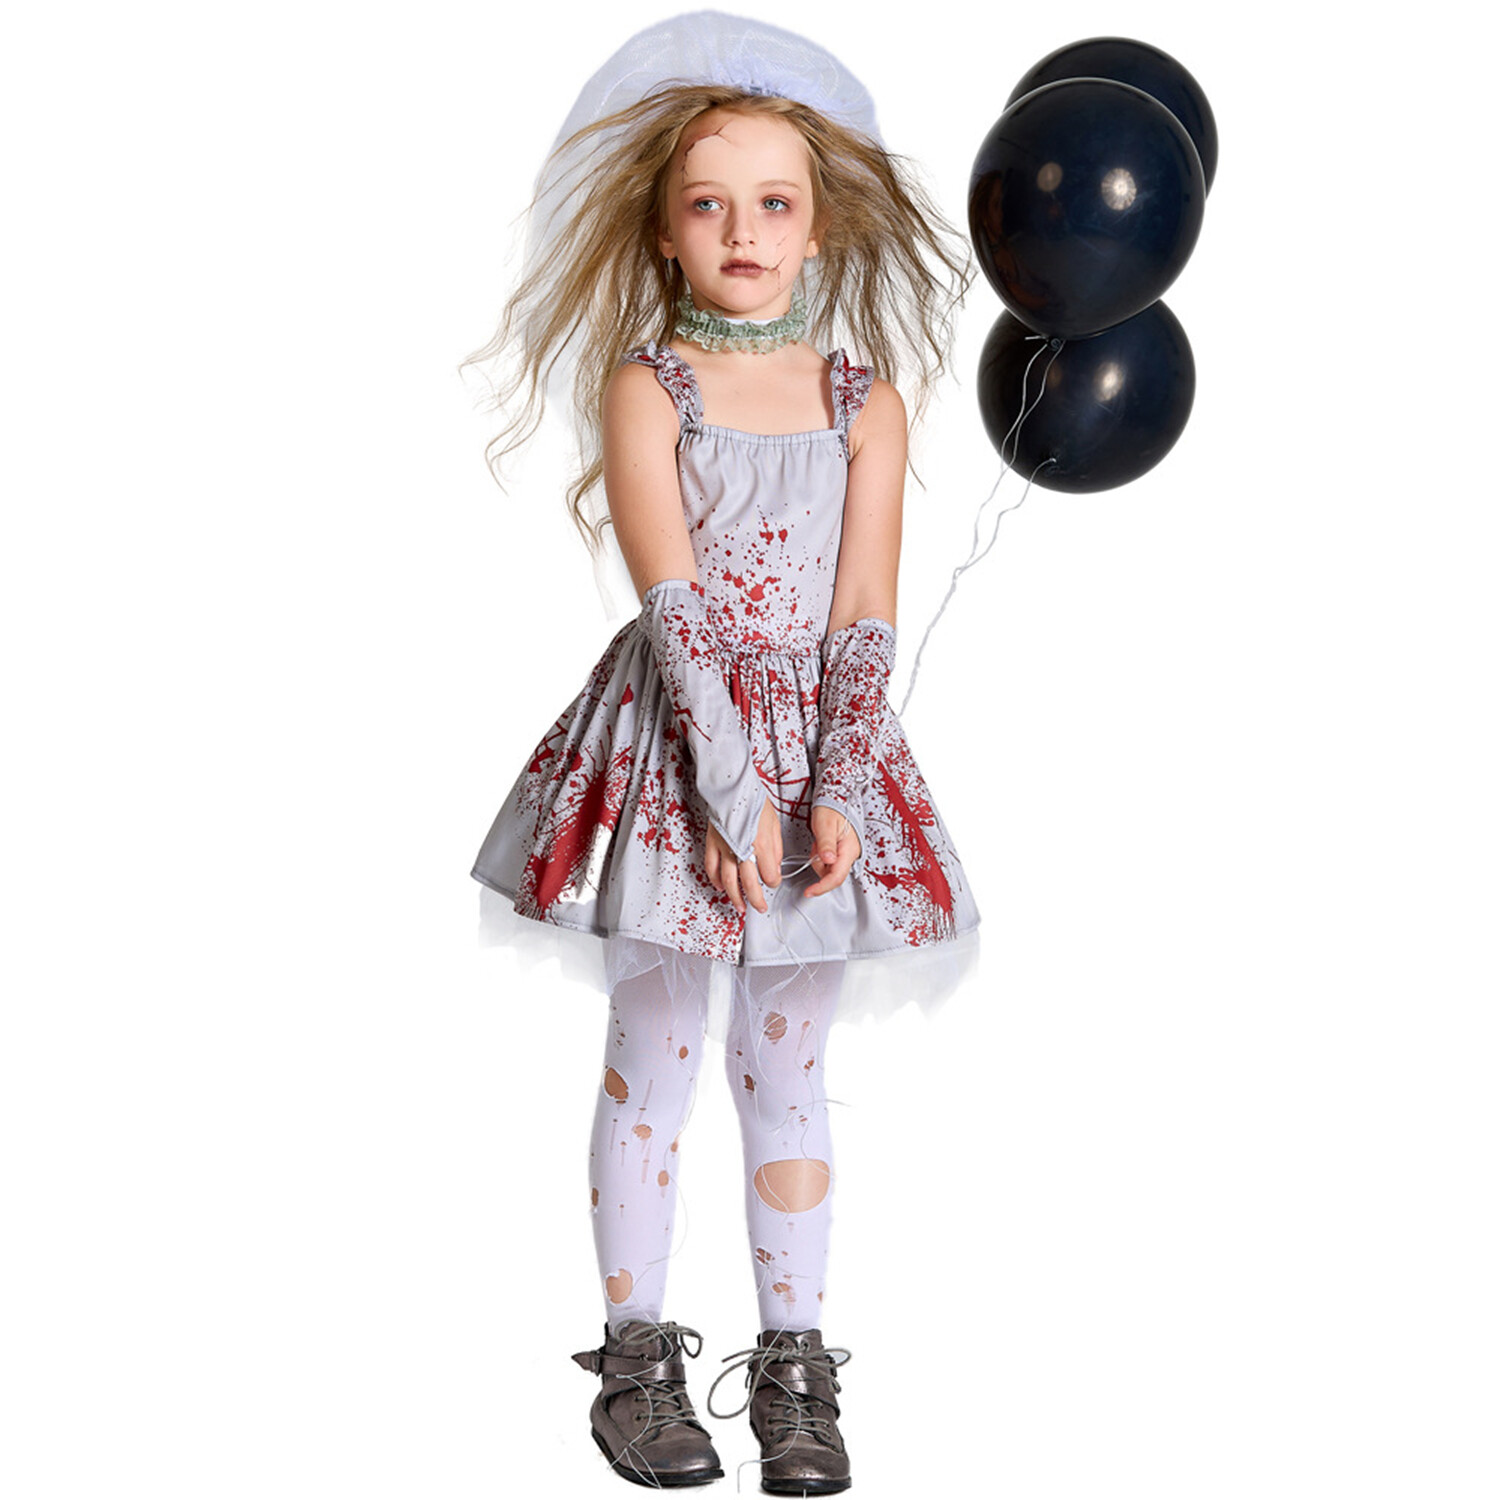 Phenas Girls Scary Bloody Ghost Bride Halloween Costume Horror Ghost Cosplay Dress-up - image 1 of 7